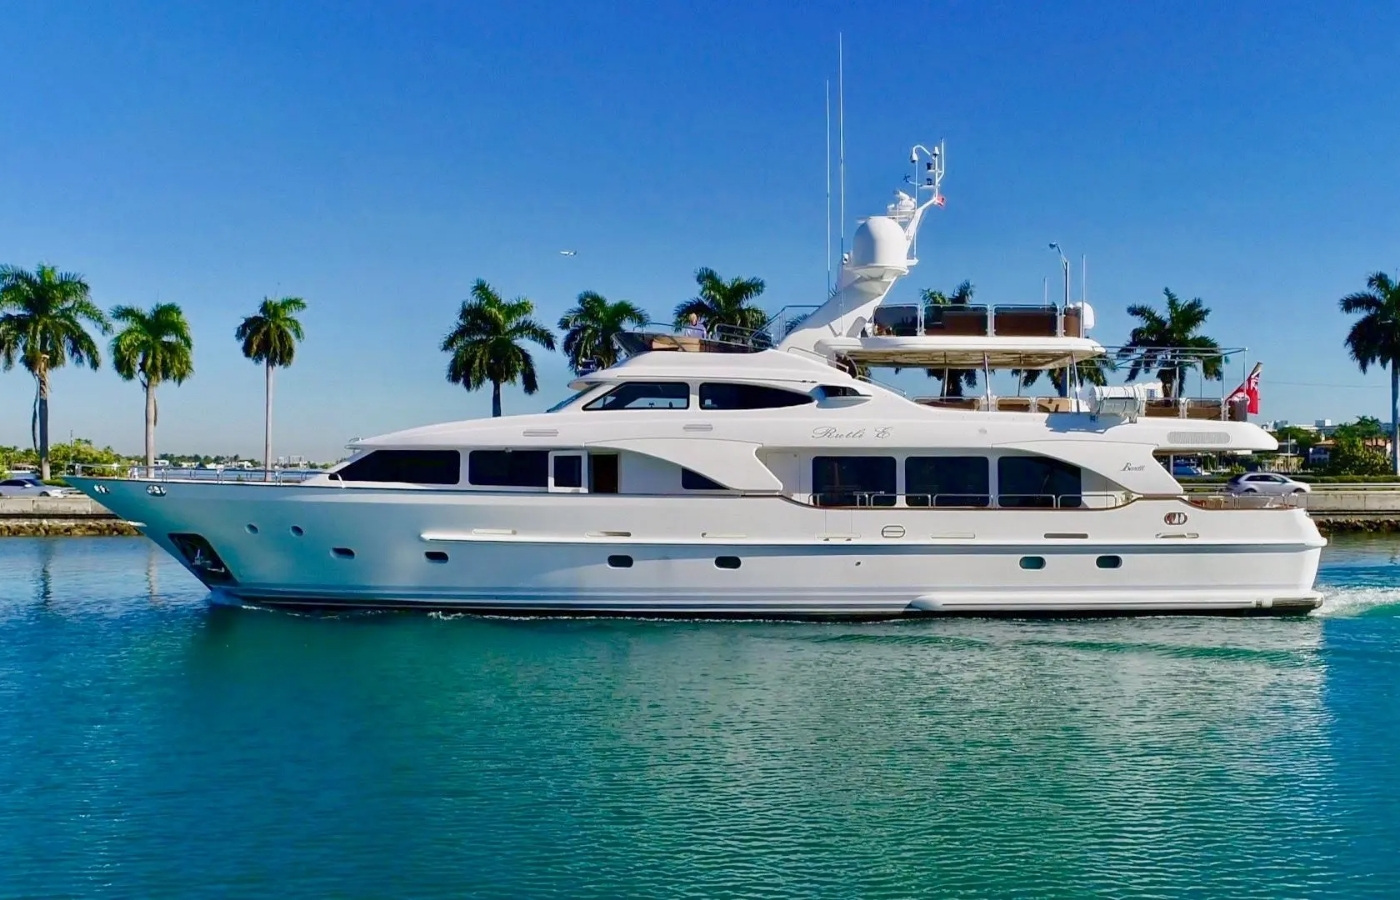 Benetti Tradition 100 Yacht Tour: Versace-Designed Superyacht is One of a Kind [In the News]